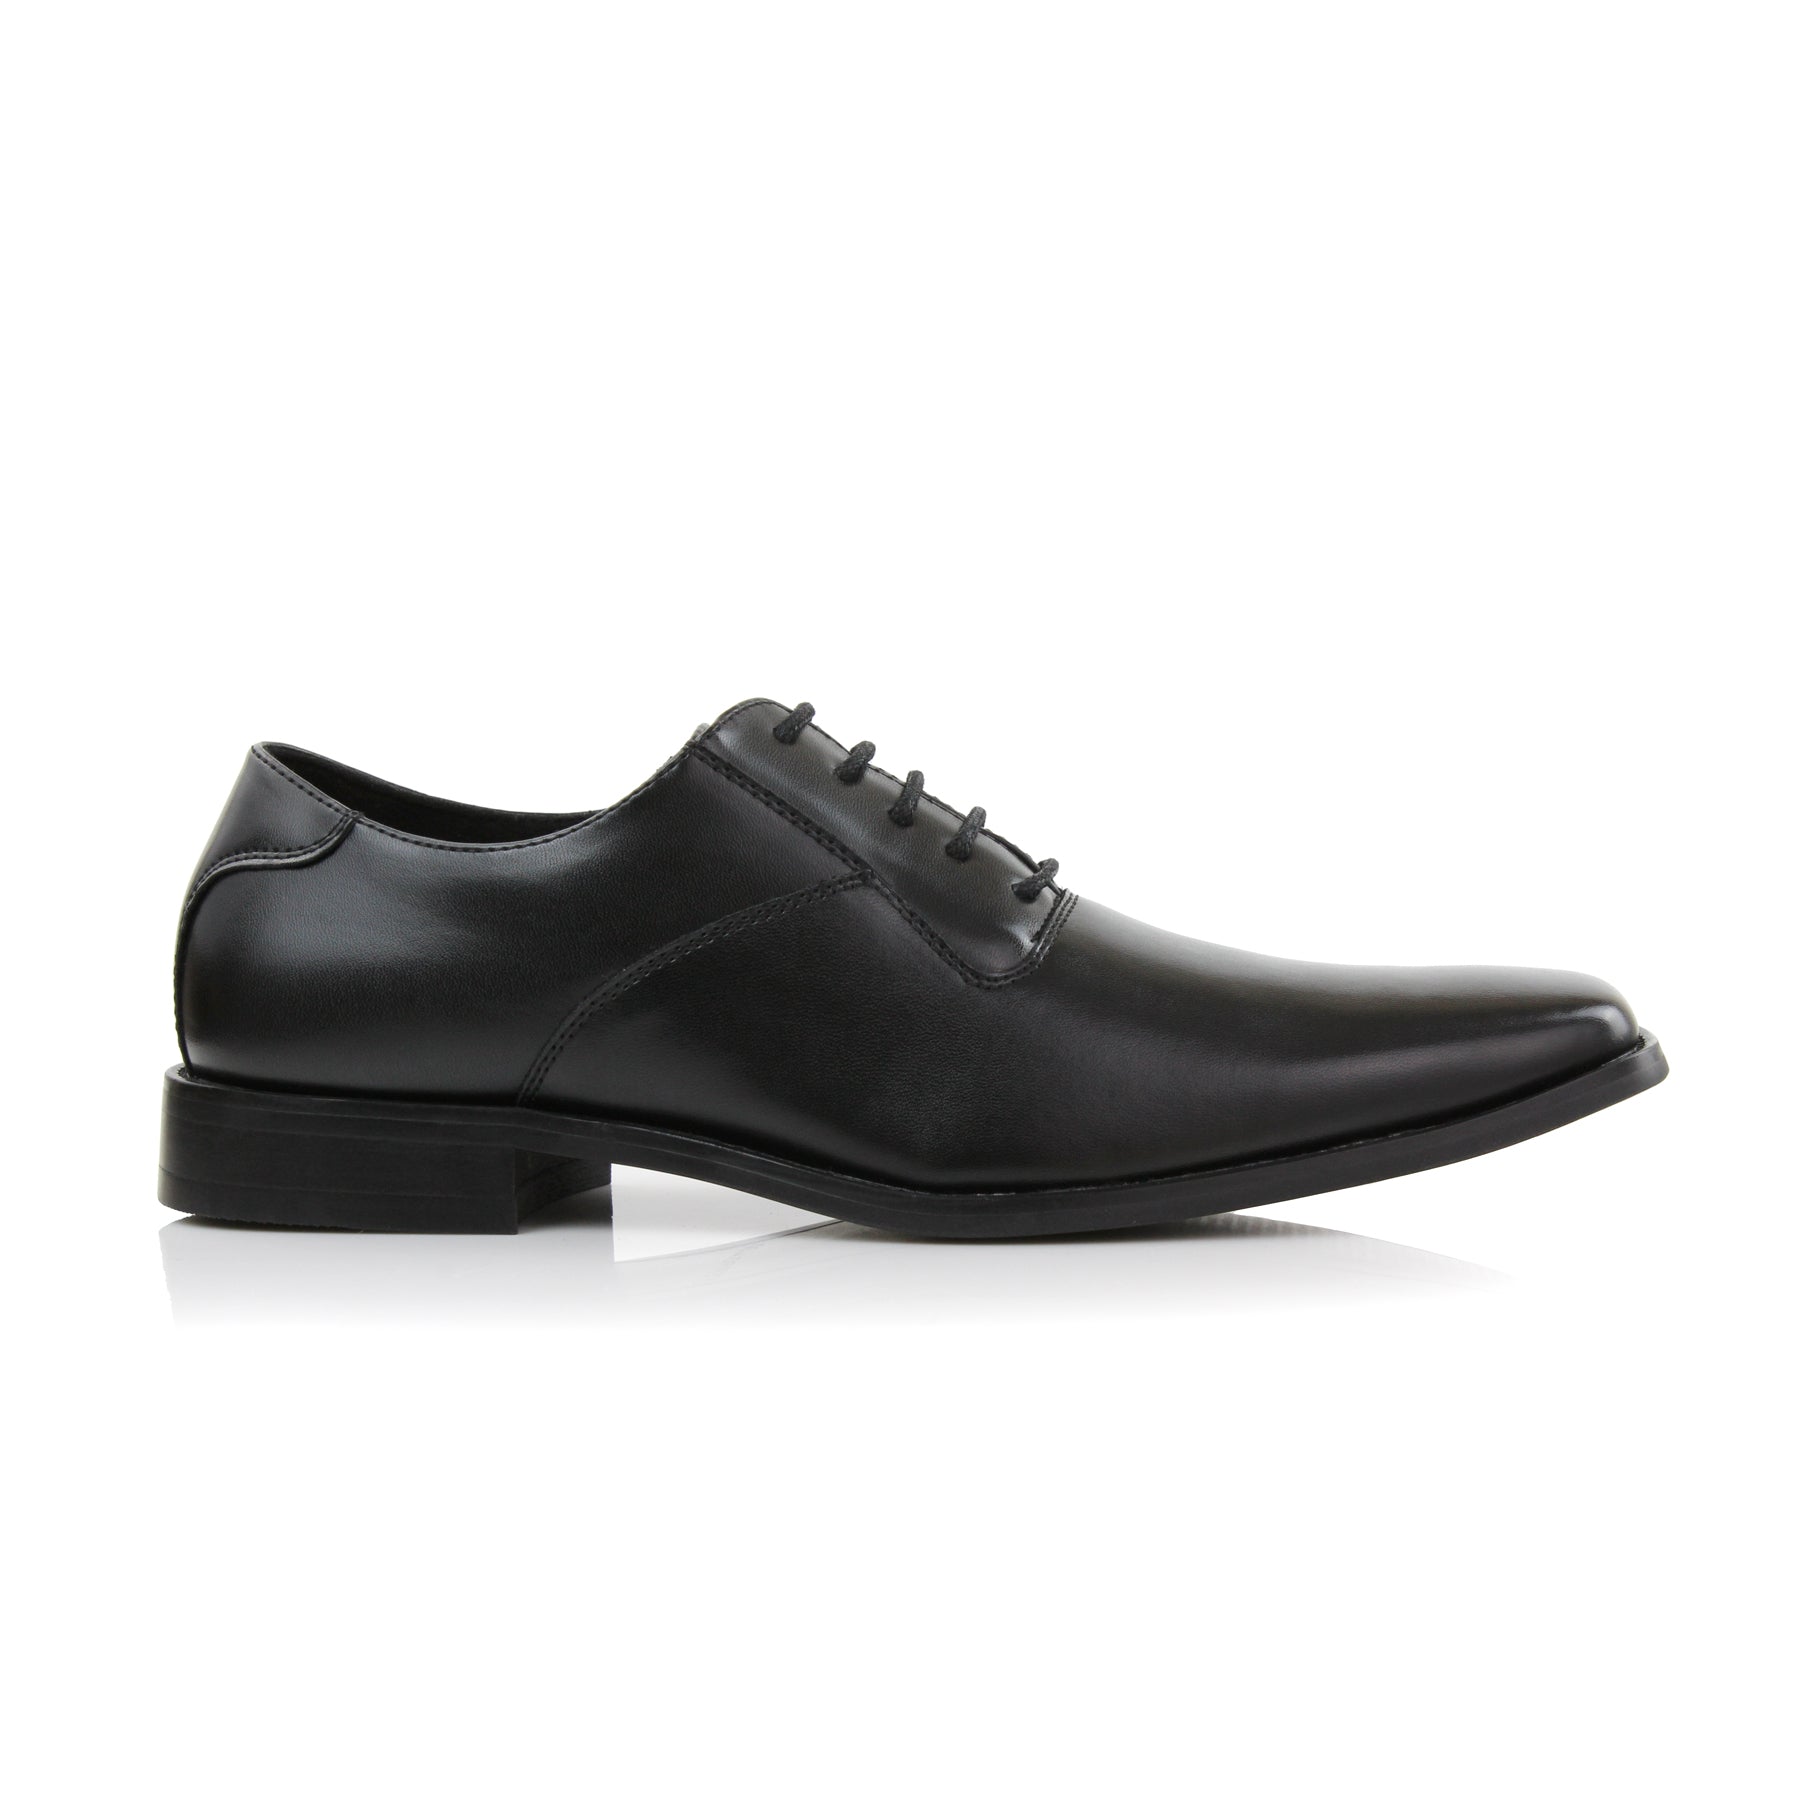 Classic Tuxedo Oxfords | Jeremiah by Ferro Aldo | Conal Footwear | Outer Side Angle View